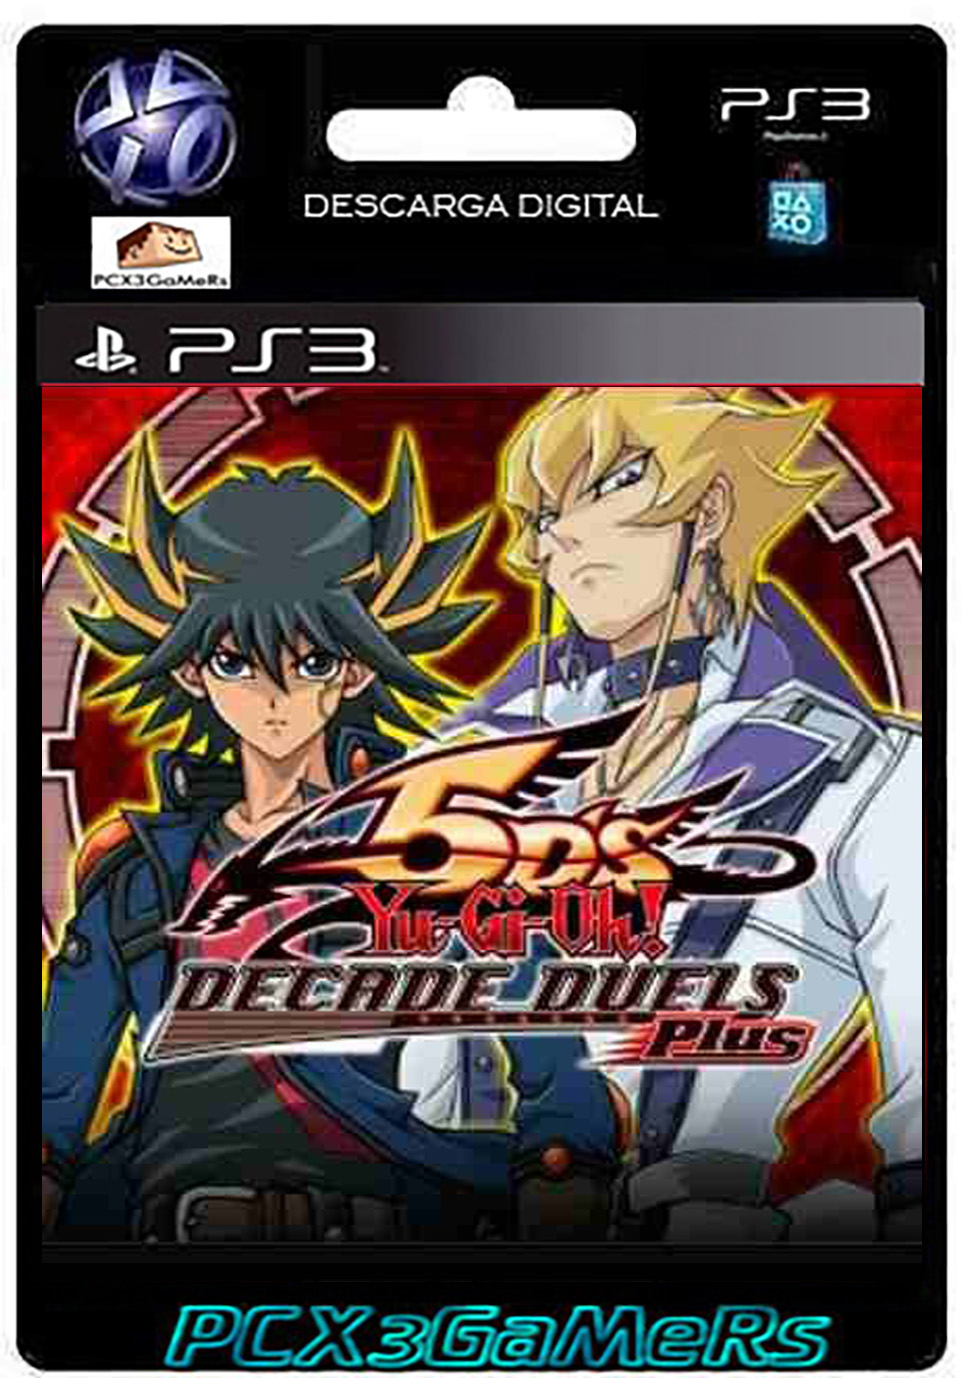 PS3 Yu-Gi-Oh! 5D's Decade Duels Plus